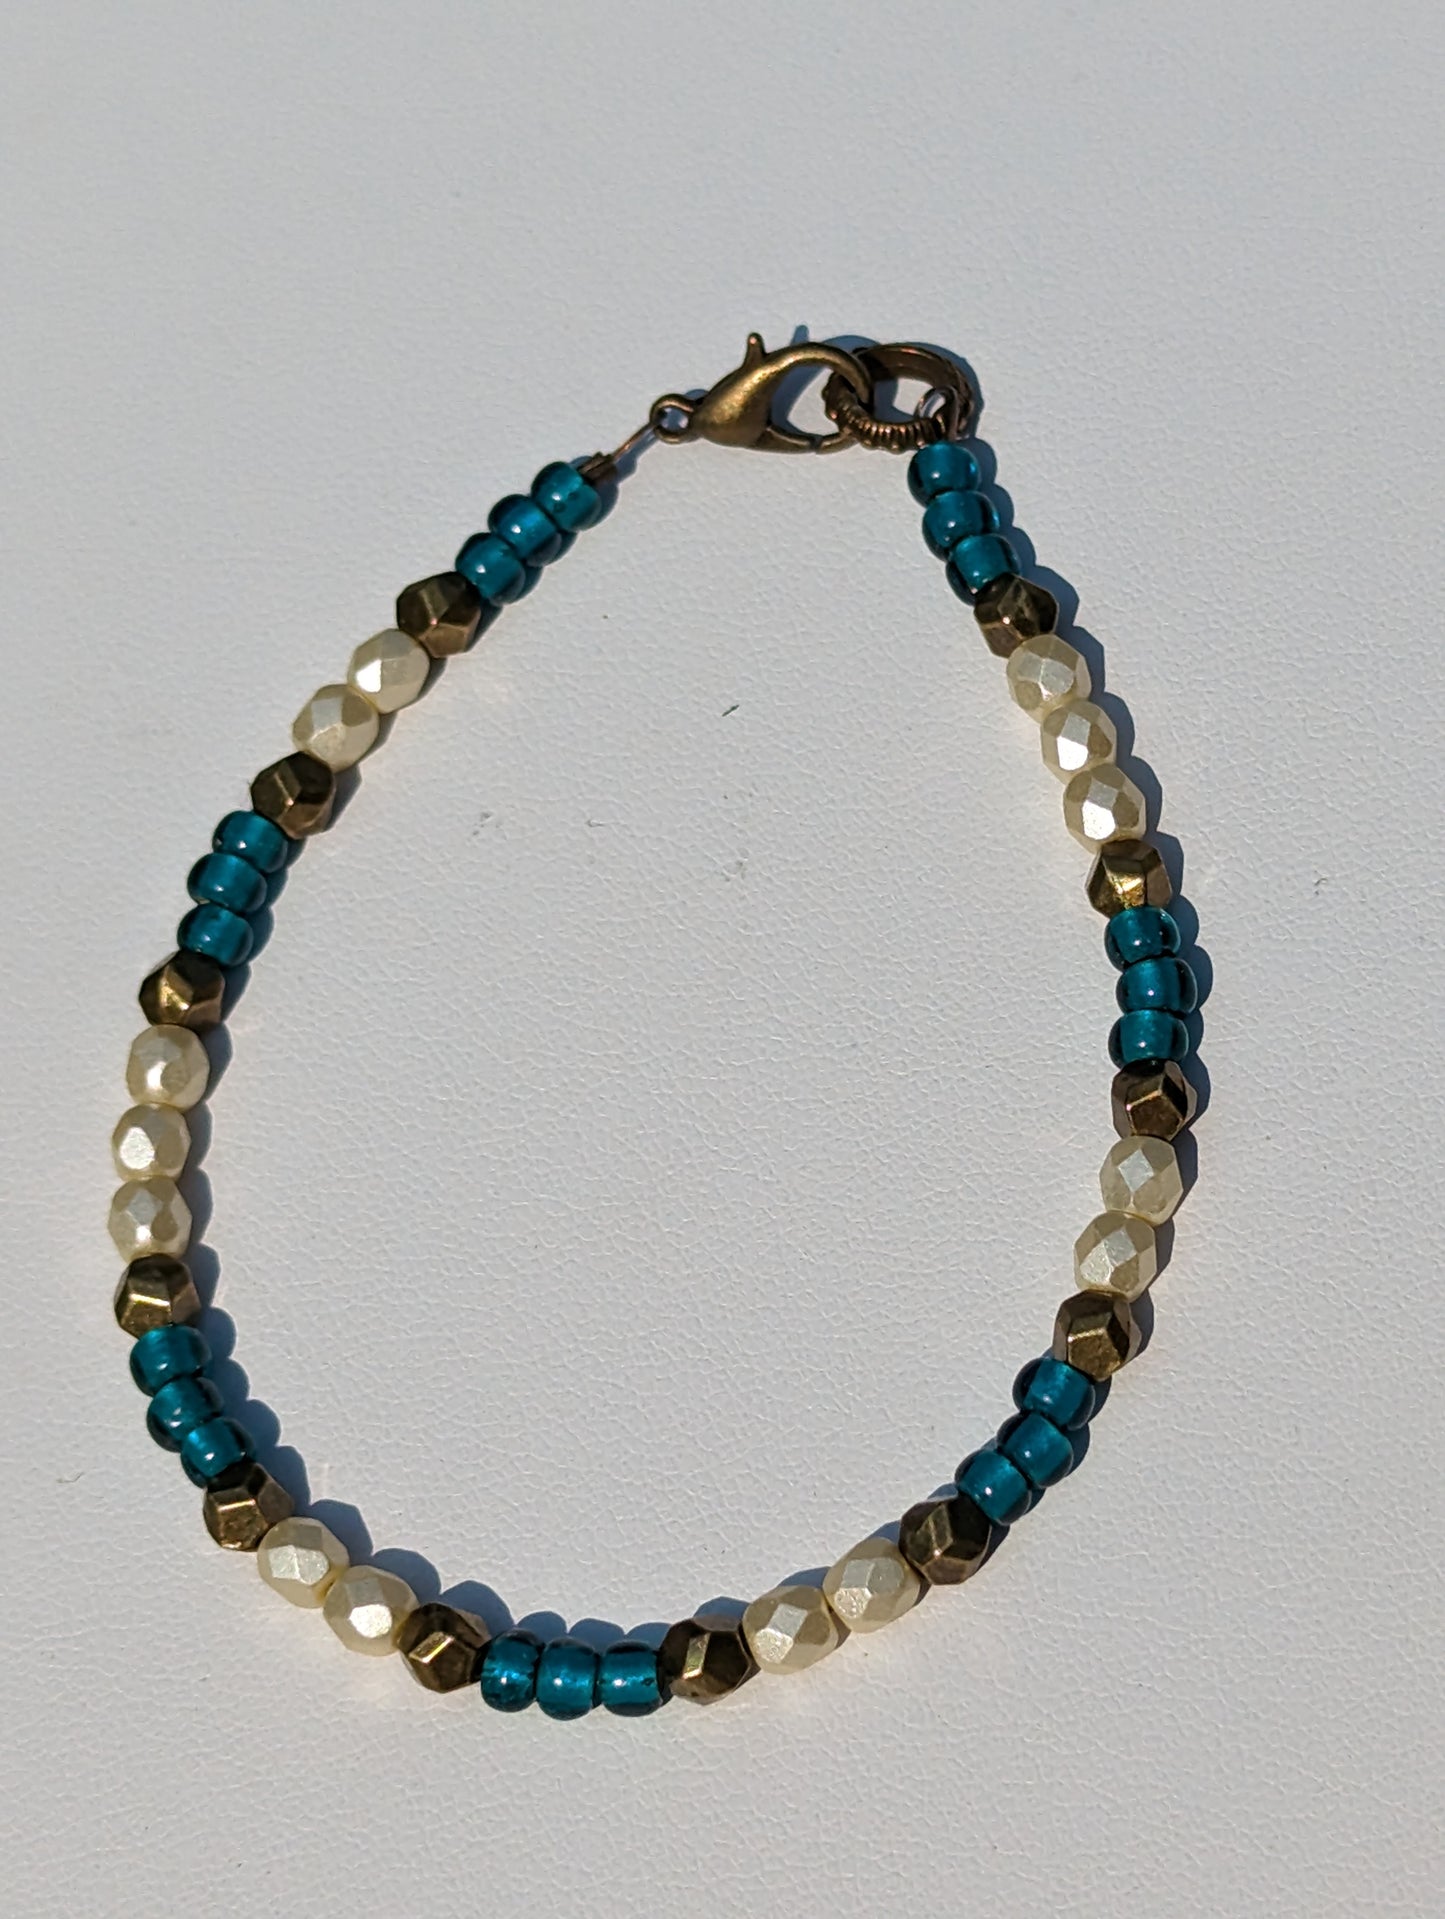 Bracelet with Teal, Pearlesque, and Brass Beads